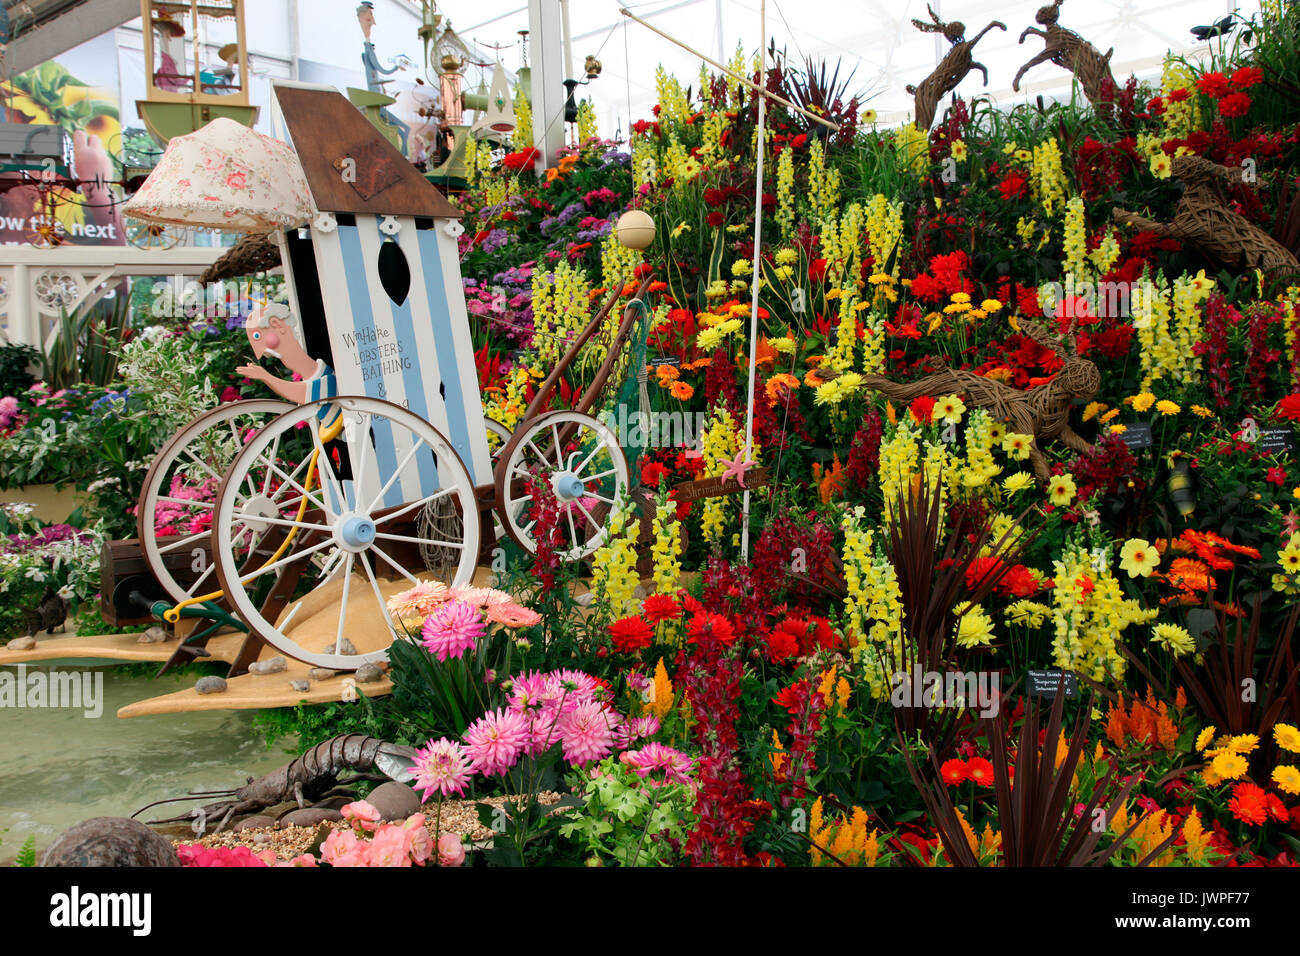 A Quiet Afternoon in Cloud Cuckoo Land, Birmingham City Council’s floral display at RHS Chelsea Flower Show 2017 Stock Photo